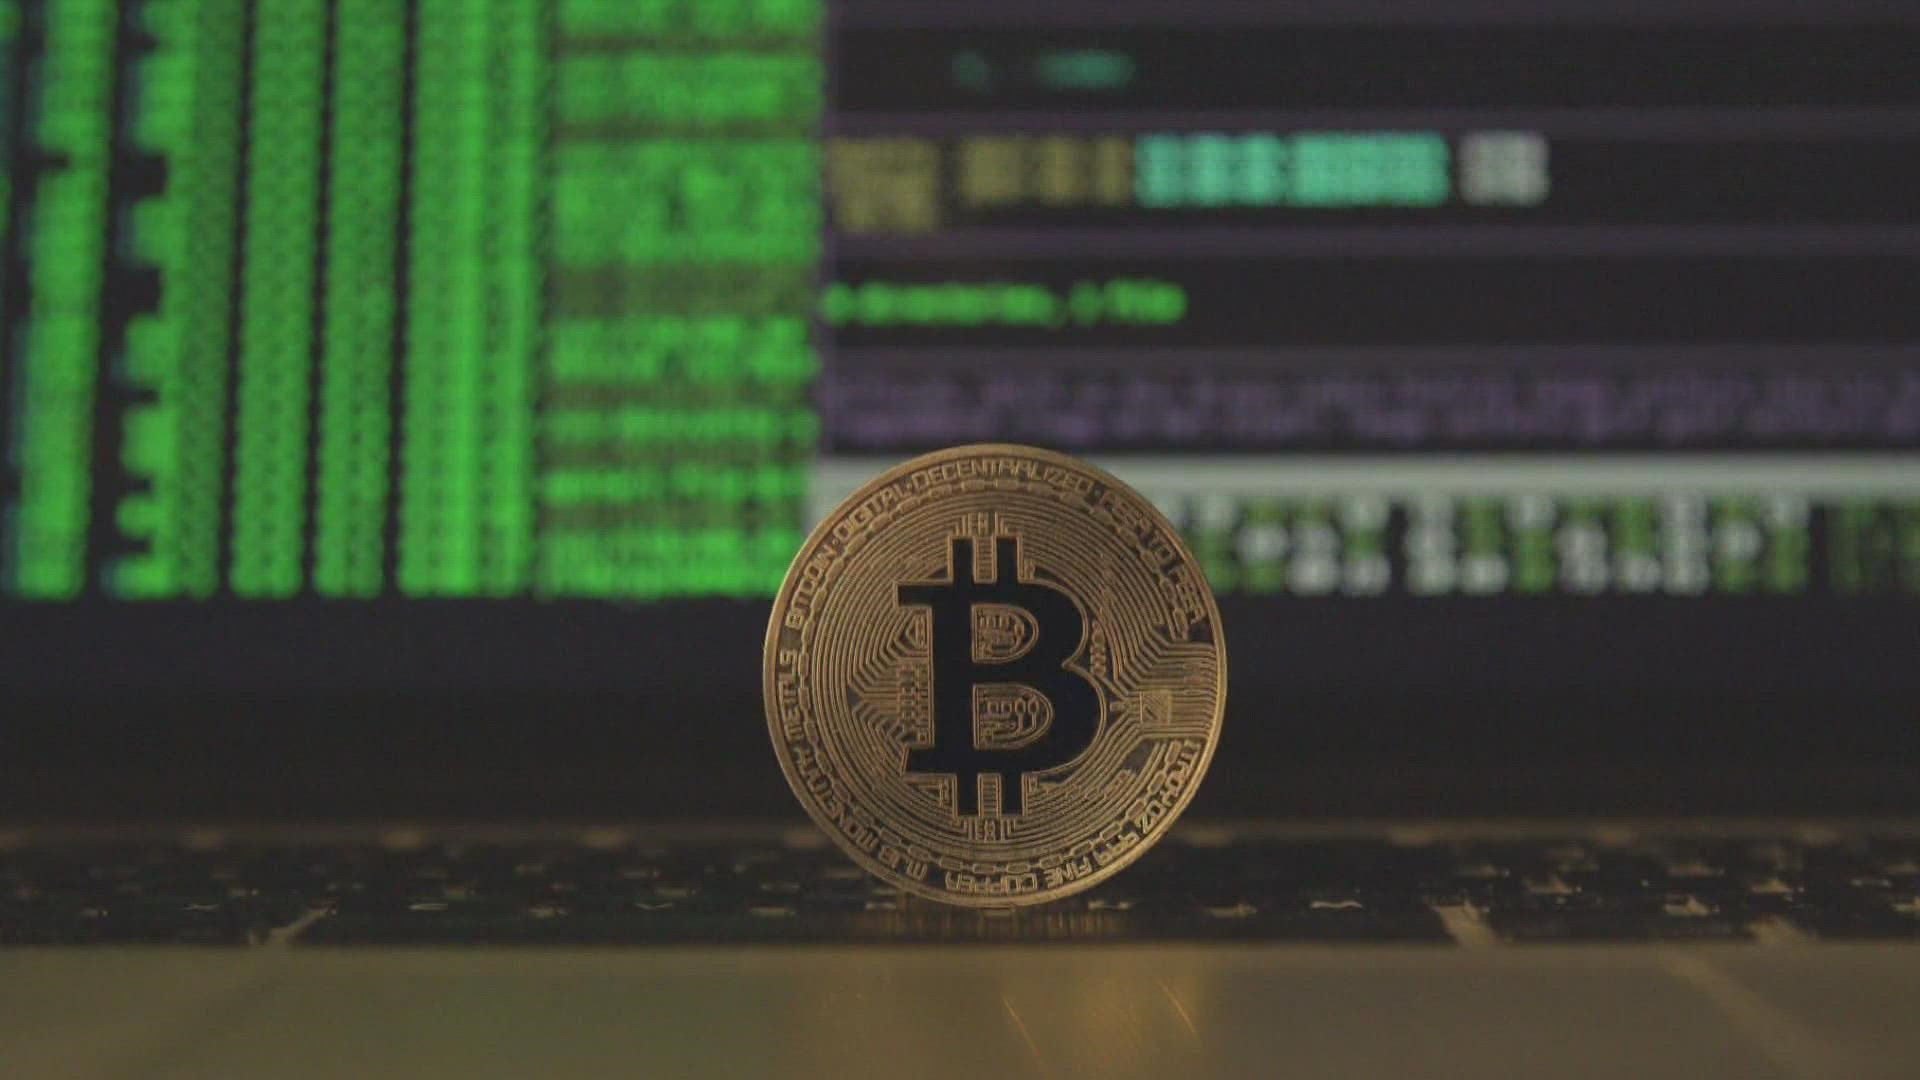 Chances are you’ve heard of cryptocurrency, but as it grows in popularity so do the questions surrounding it.